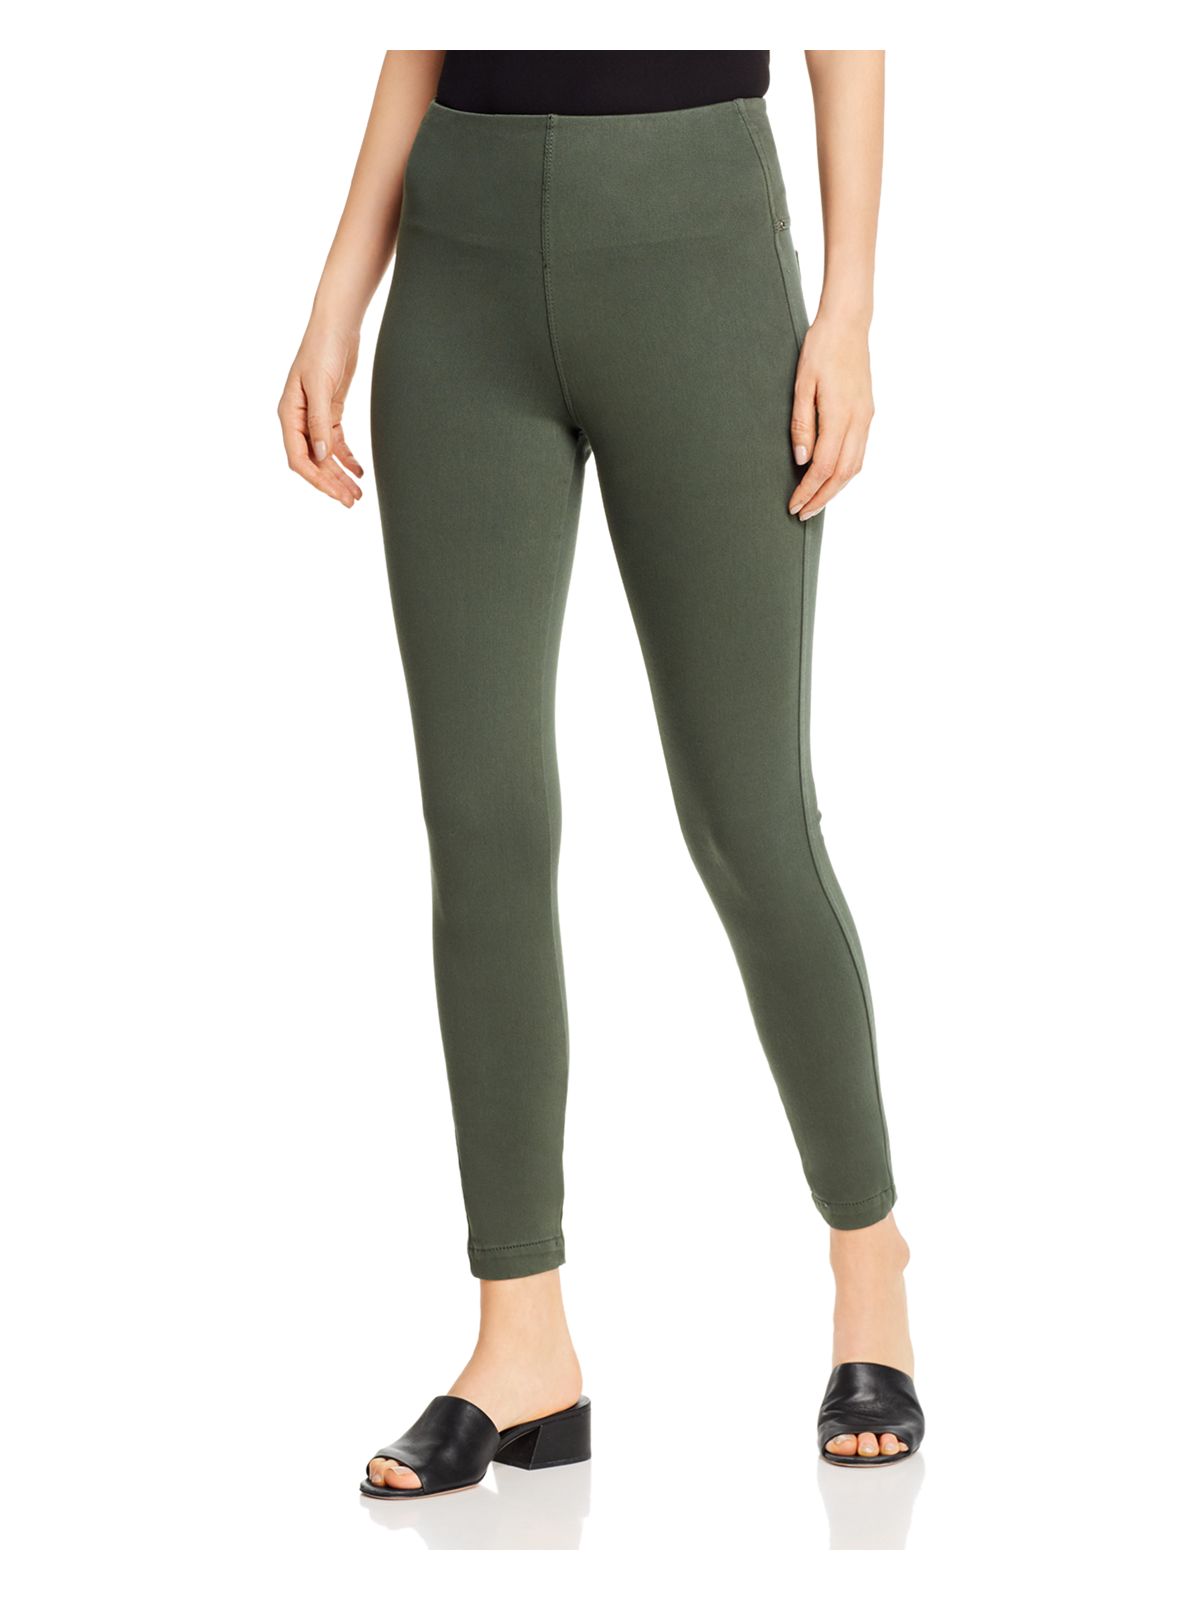 LYSSE Womens Green Stretch Pocketed Ankle High Waist Leggings S